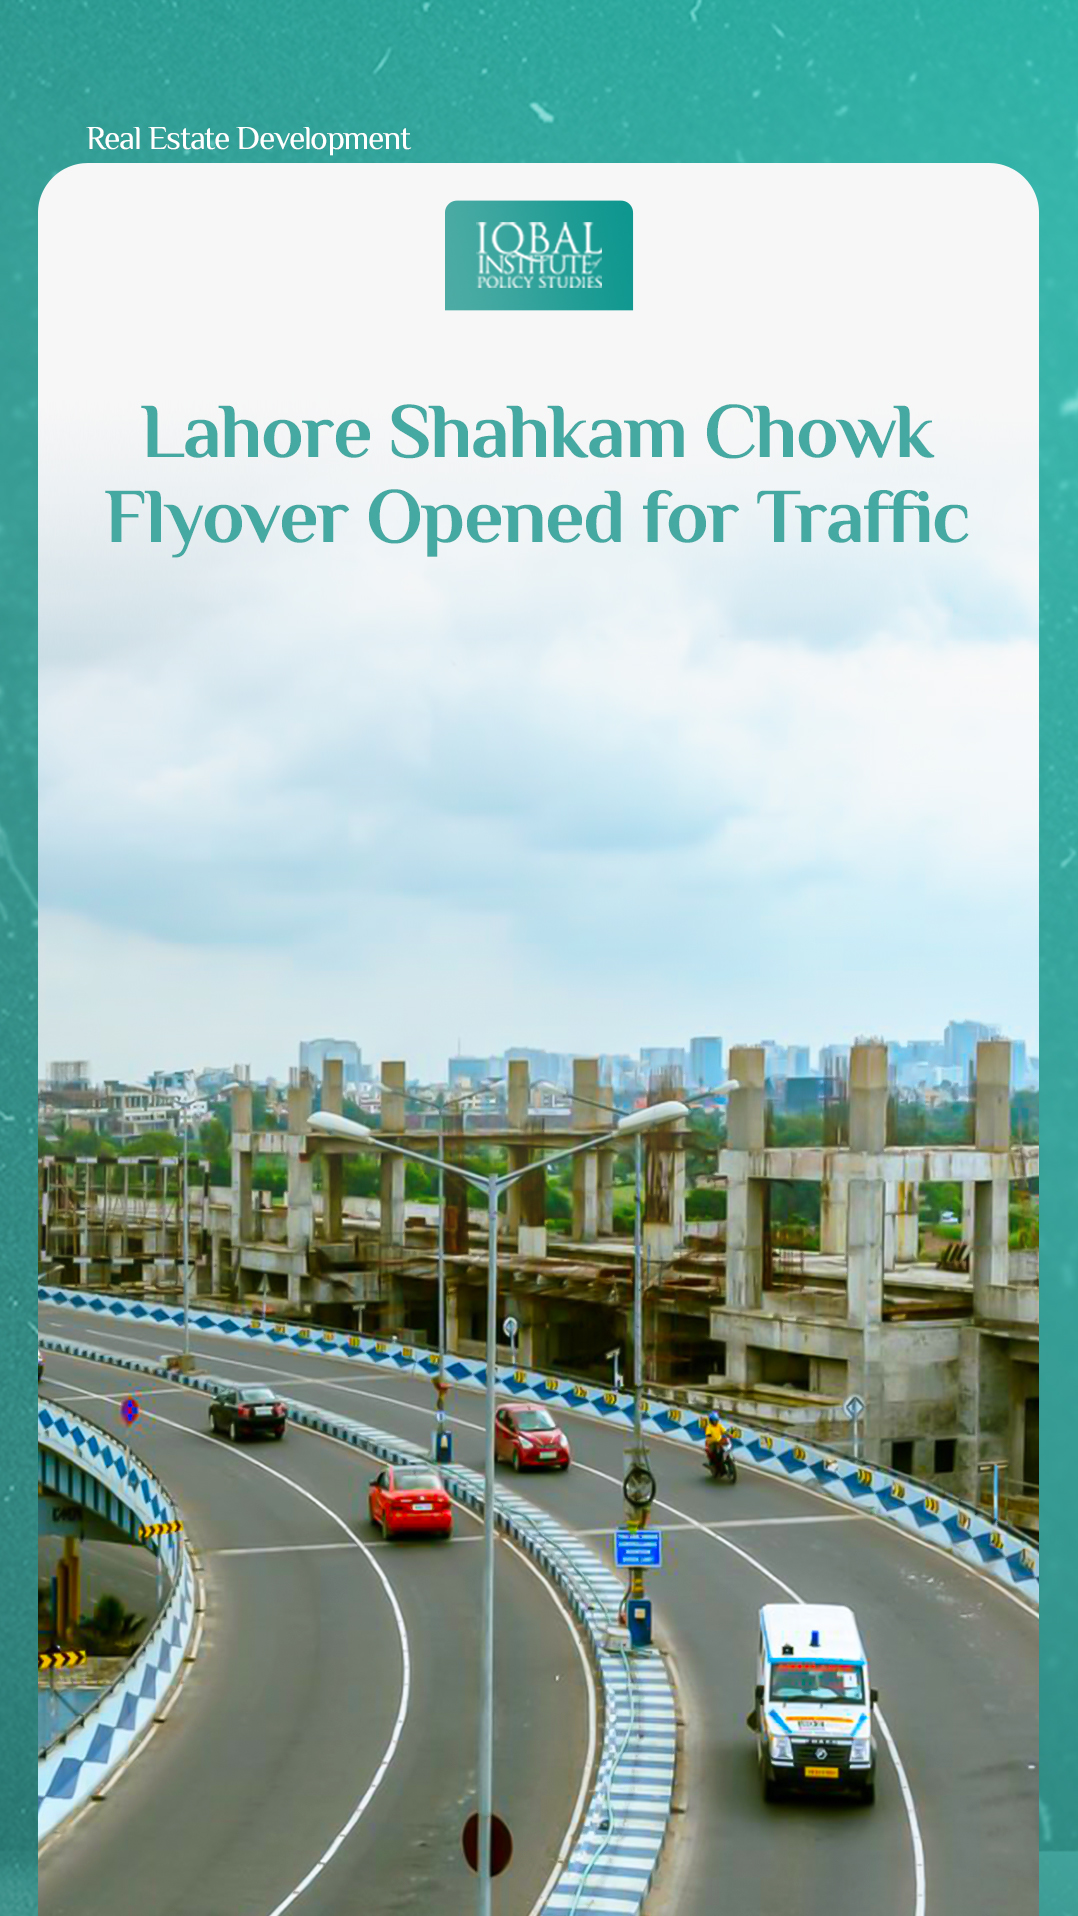 Lahore Shahkam Chowk Flyover Opened for Traffic